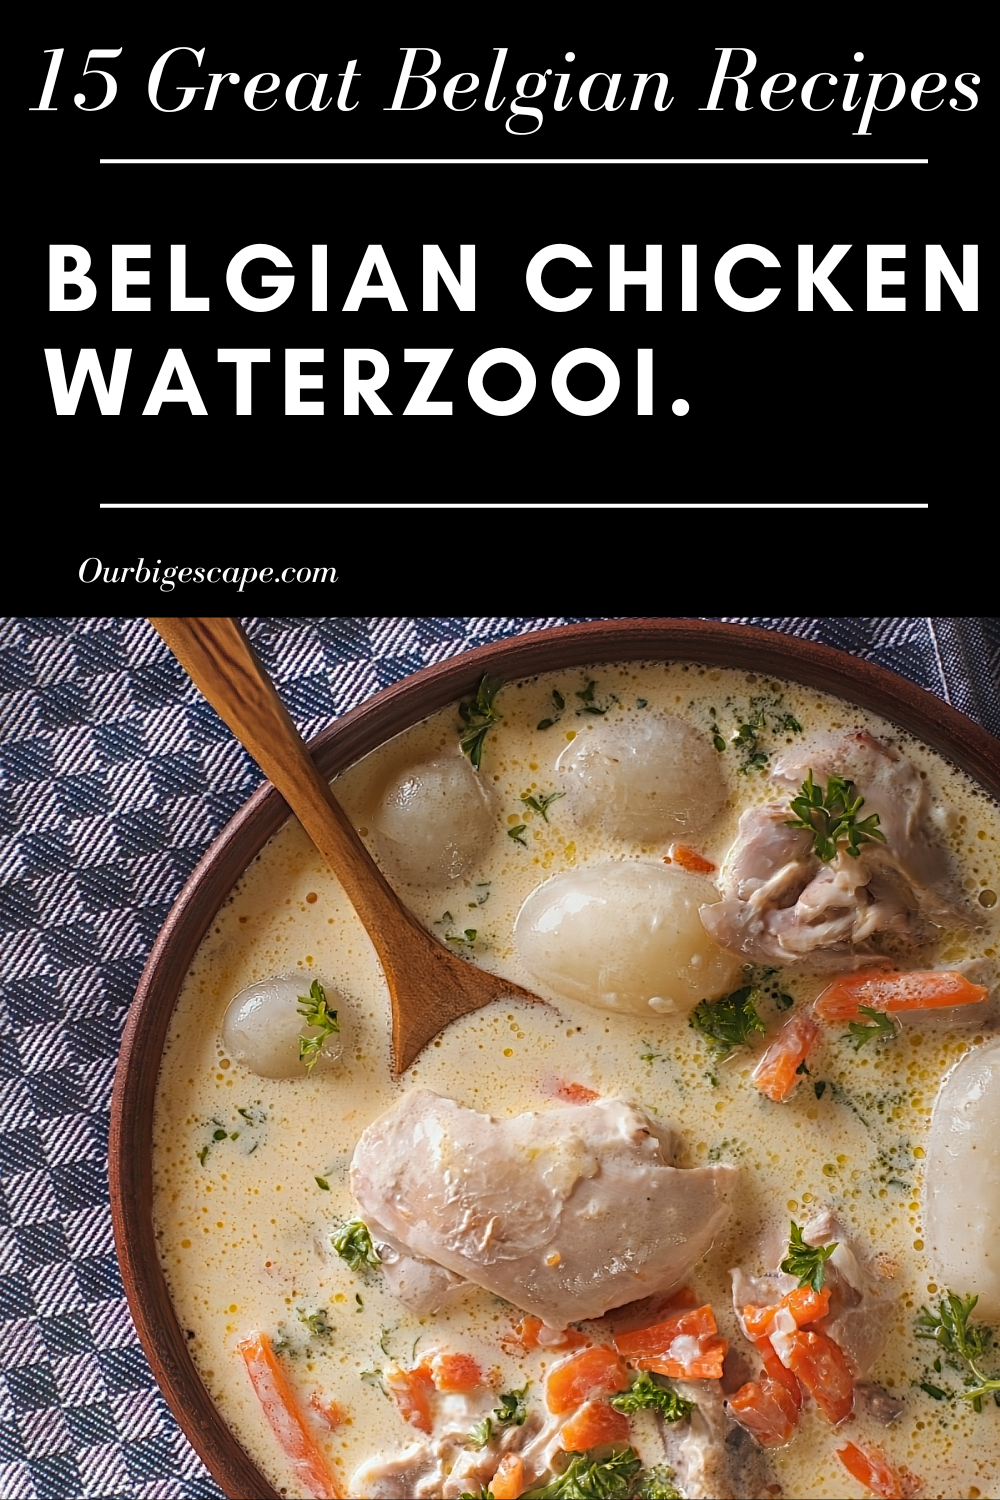 Traditional Belgian Recipes